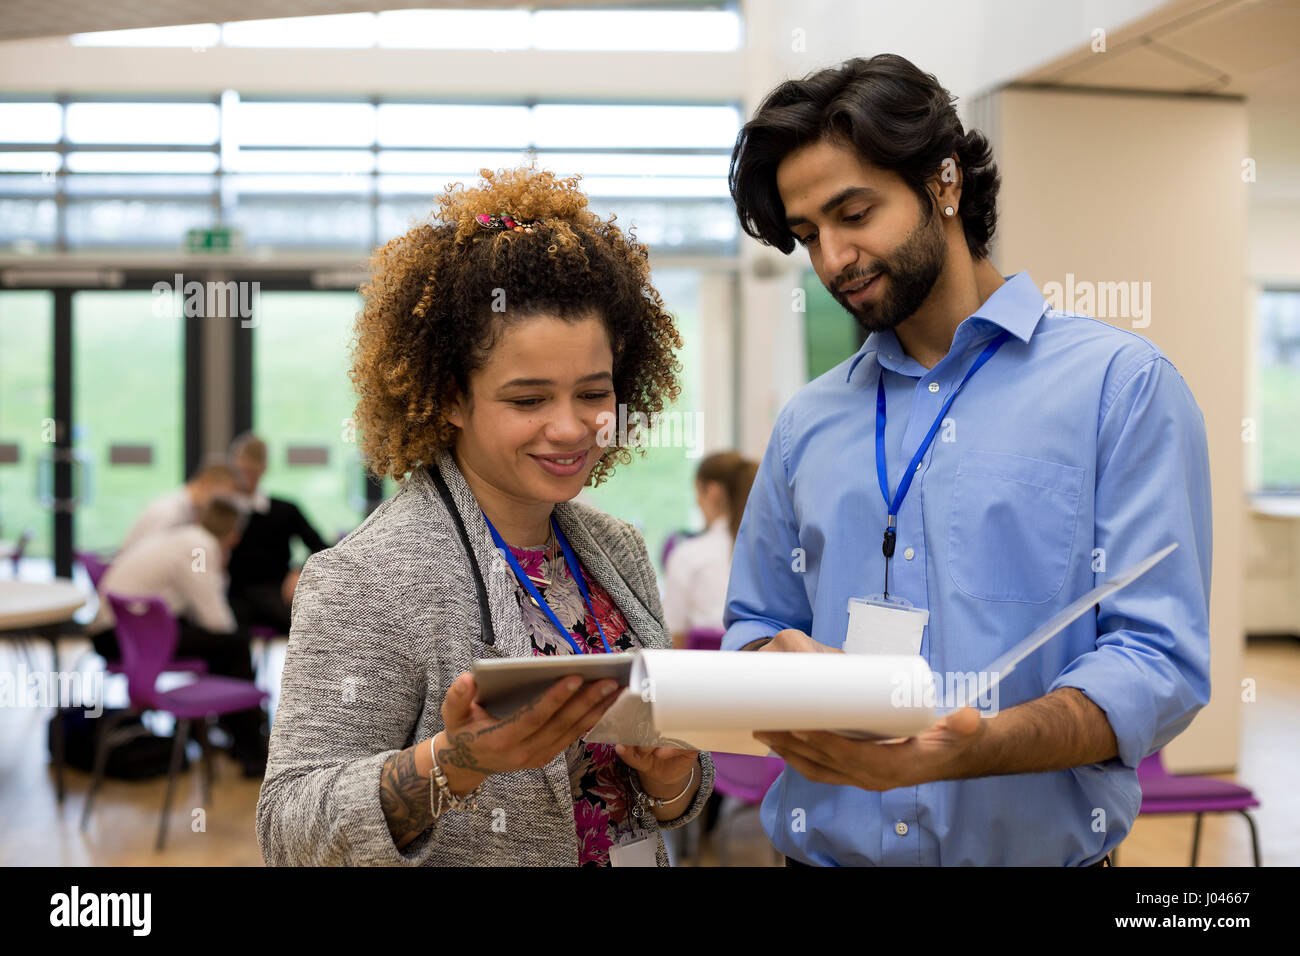 Two teachers are holding some paperwork in front of them and are discussing it together. Stock Photo